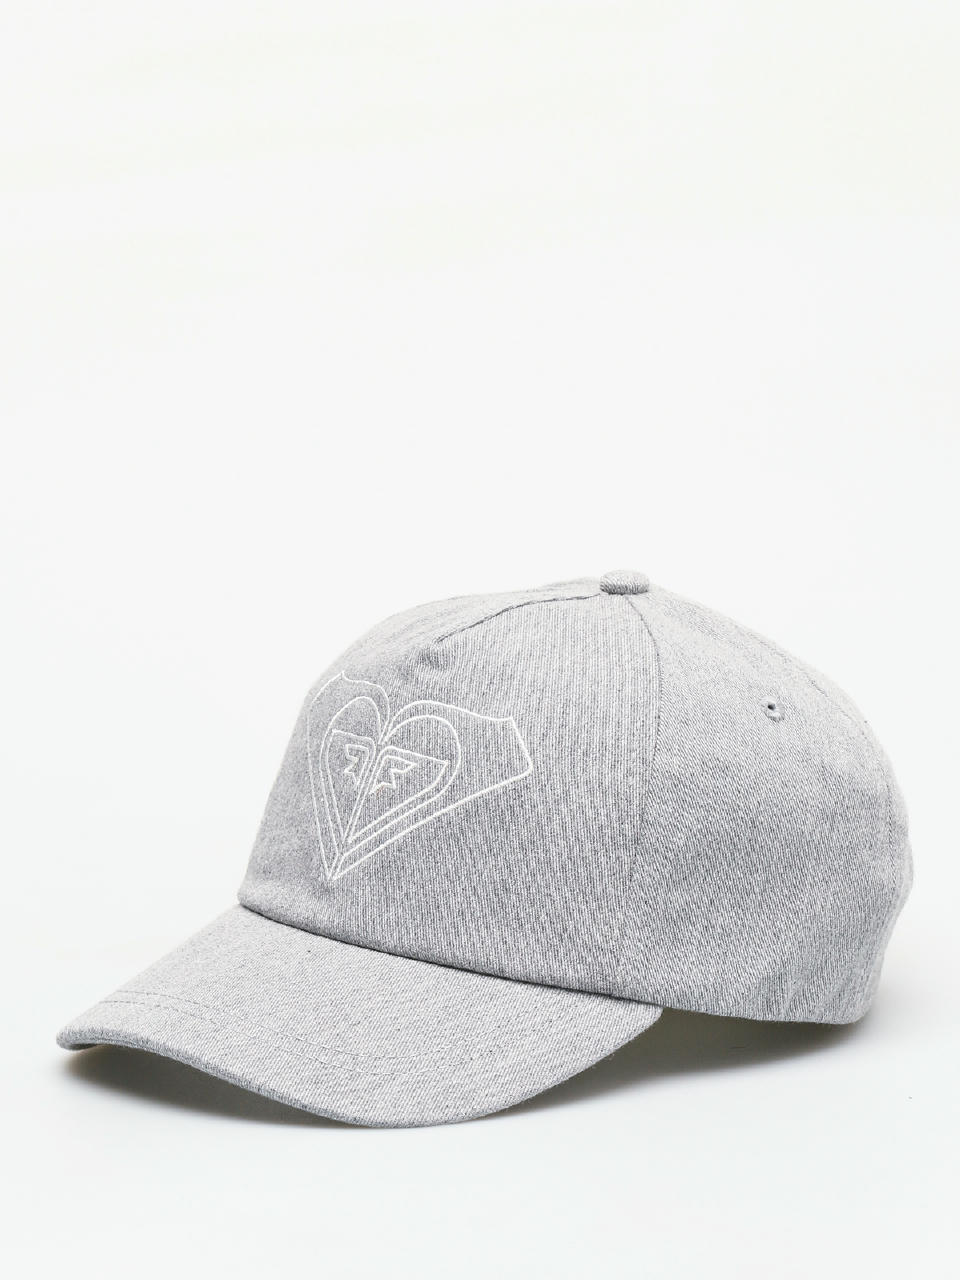 Roxy Extra Innings A ZD Cap Wmn (heritage heather)